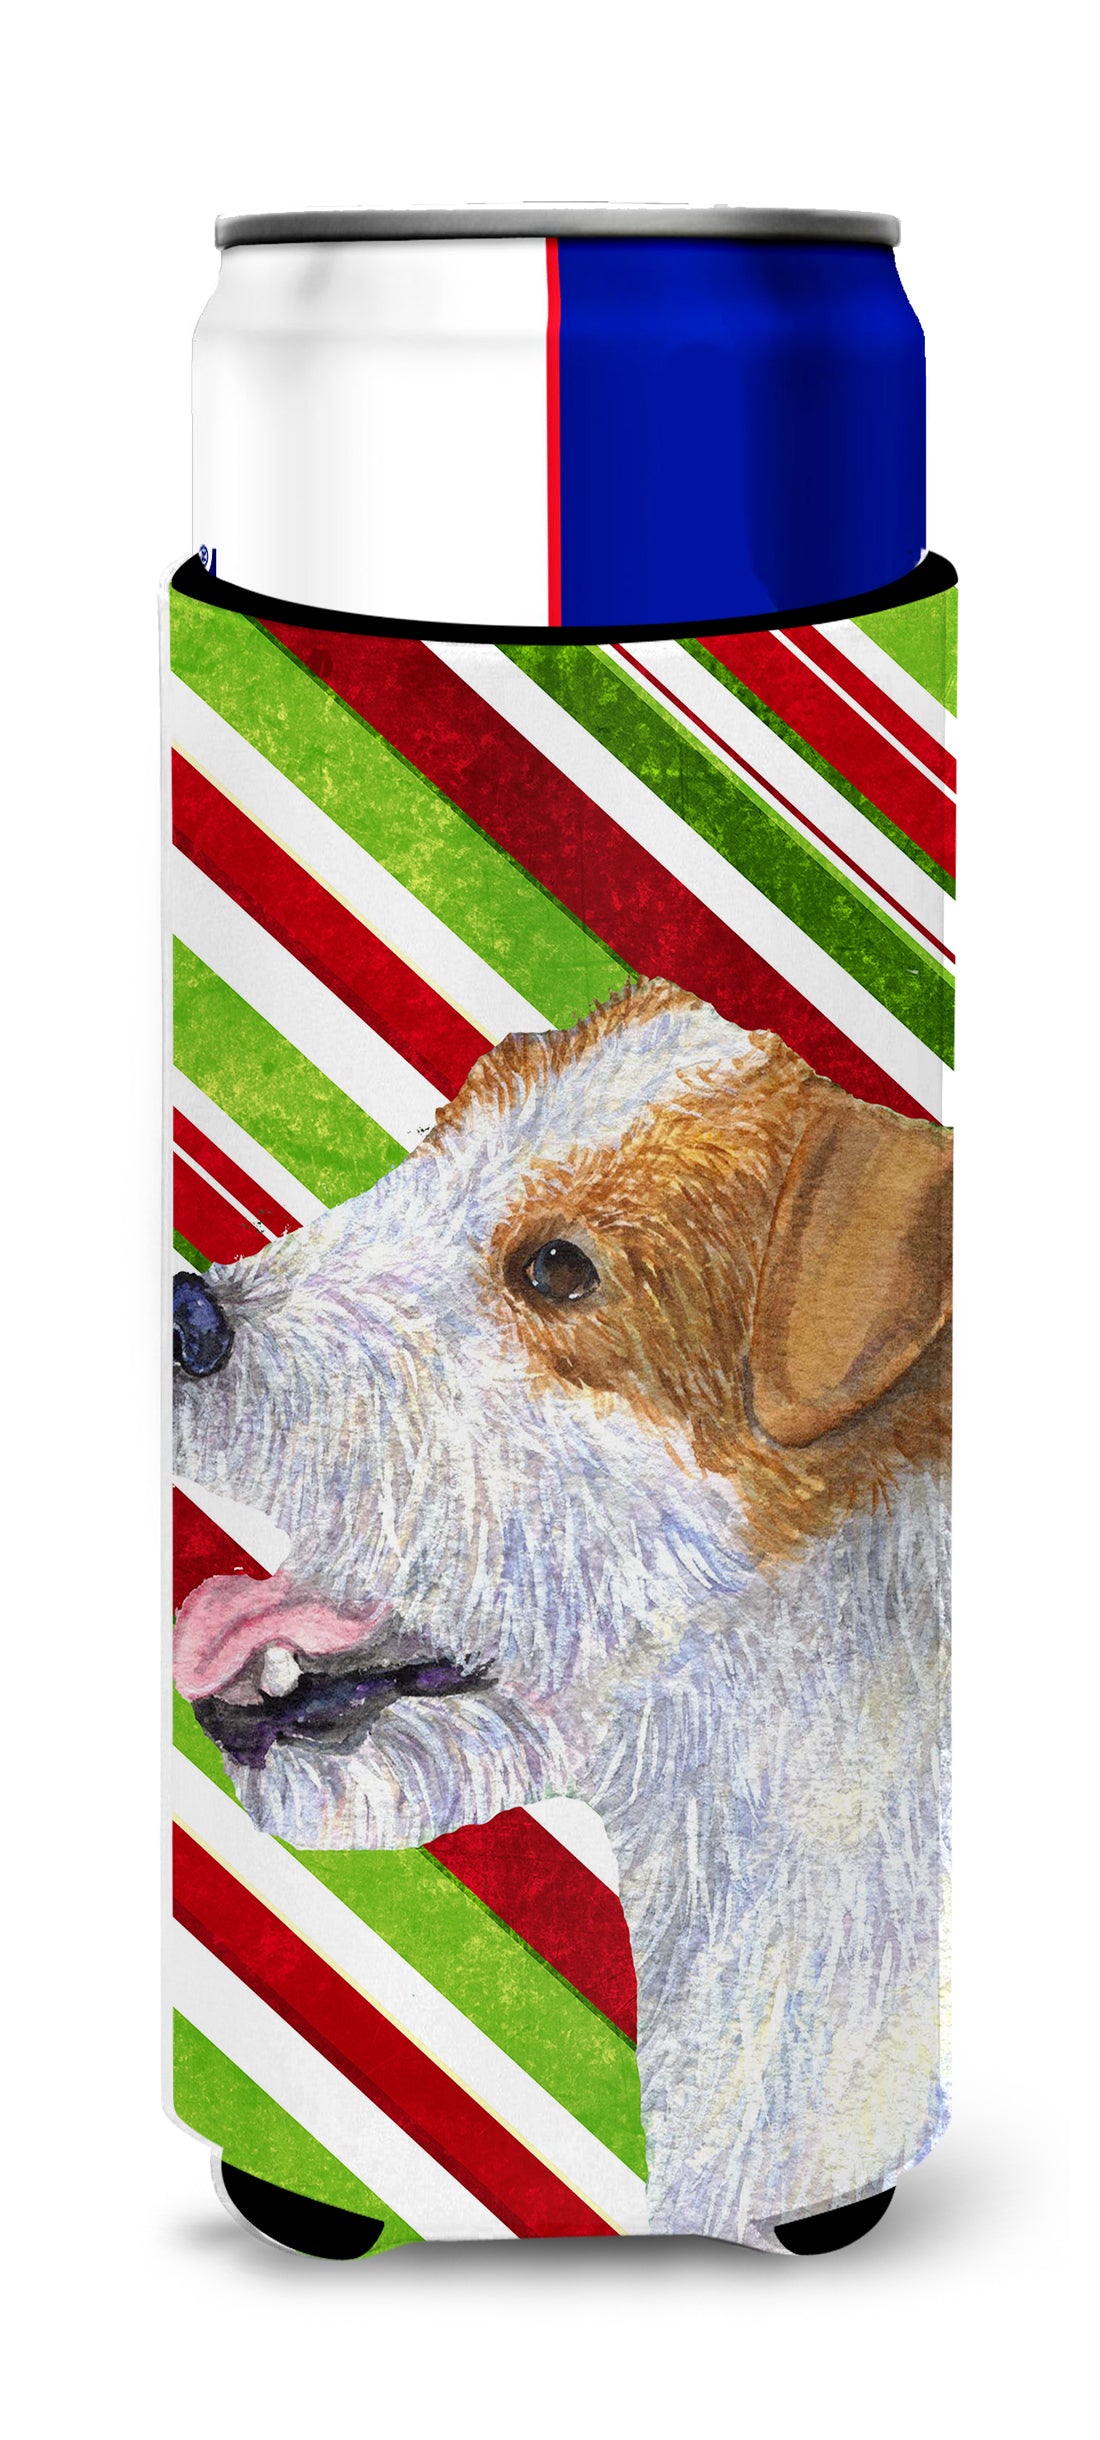 Jack Russell Terrier Candy Cane Holiday Christmas Ultra Beverage Insulators for slim cans SS4573MUK